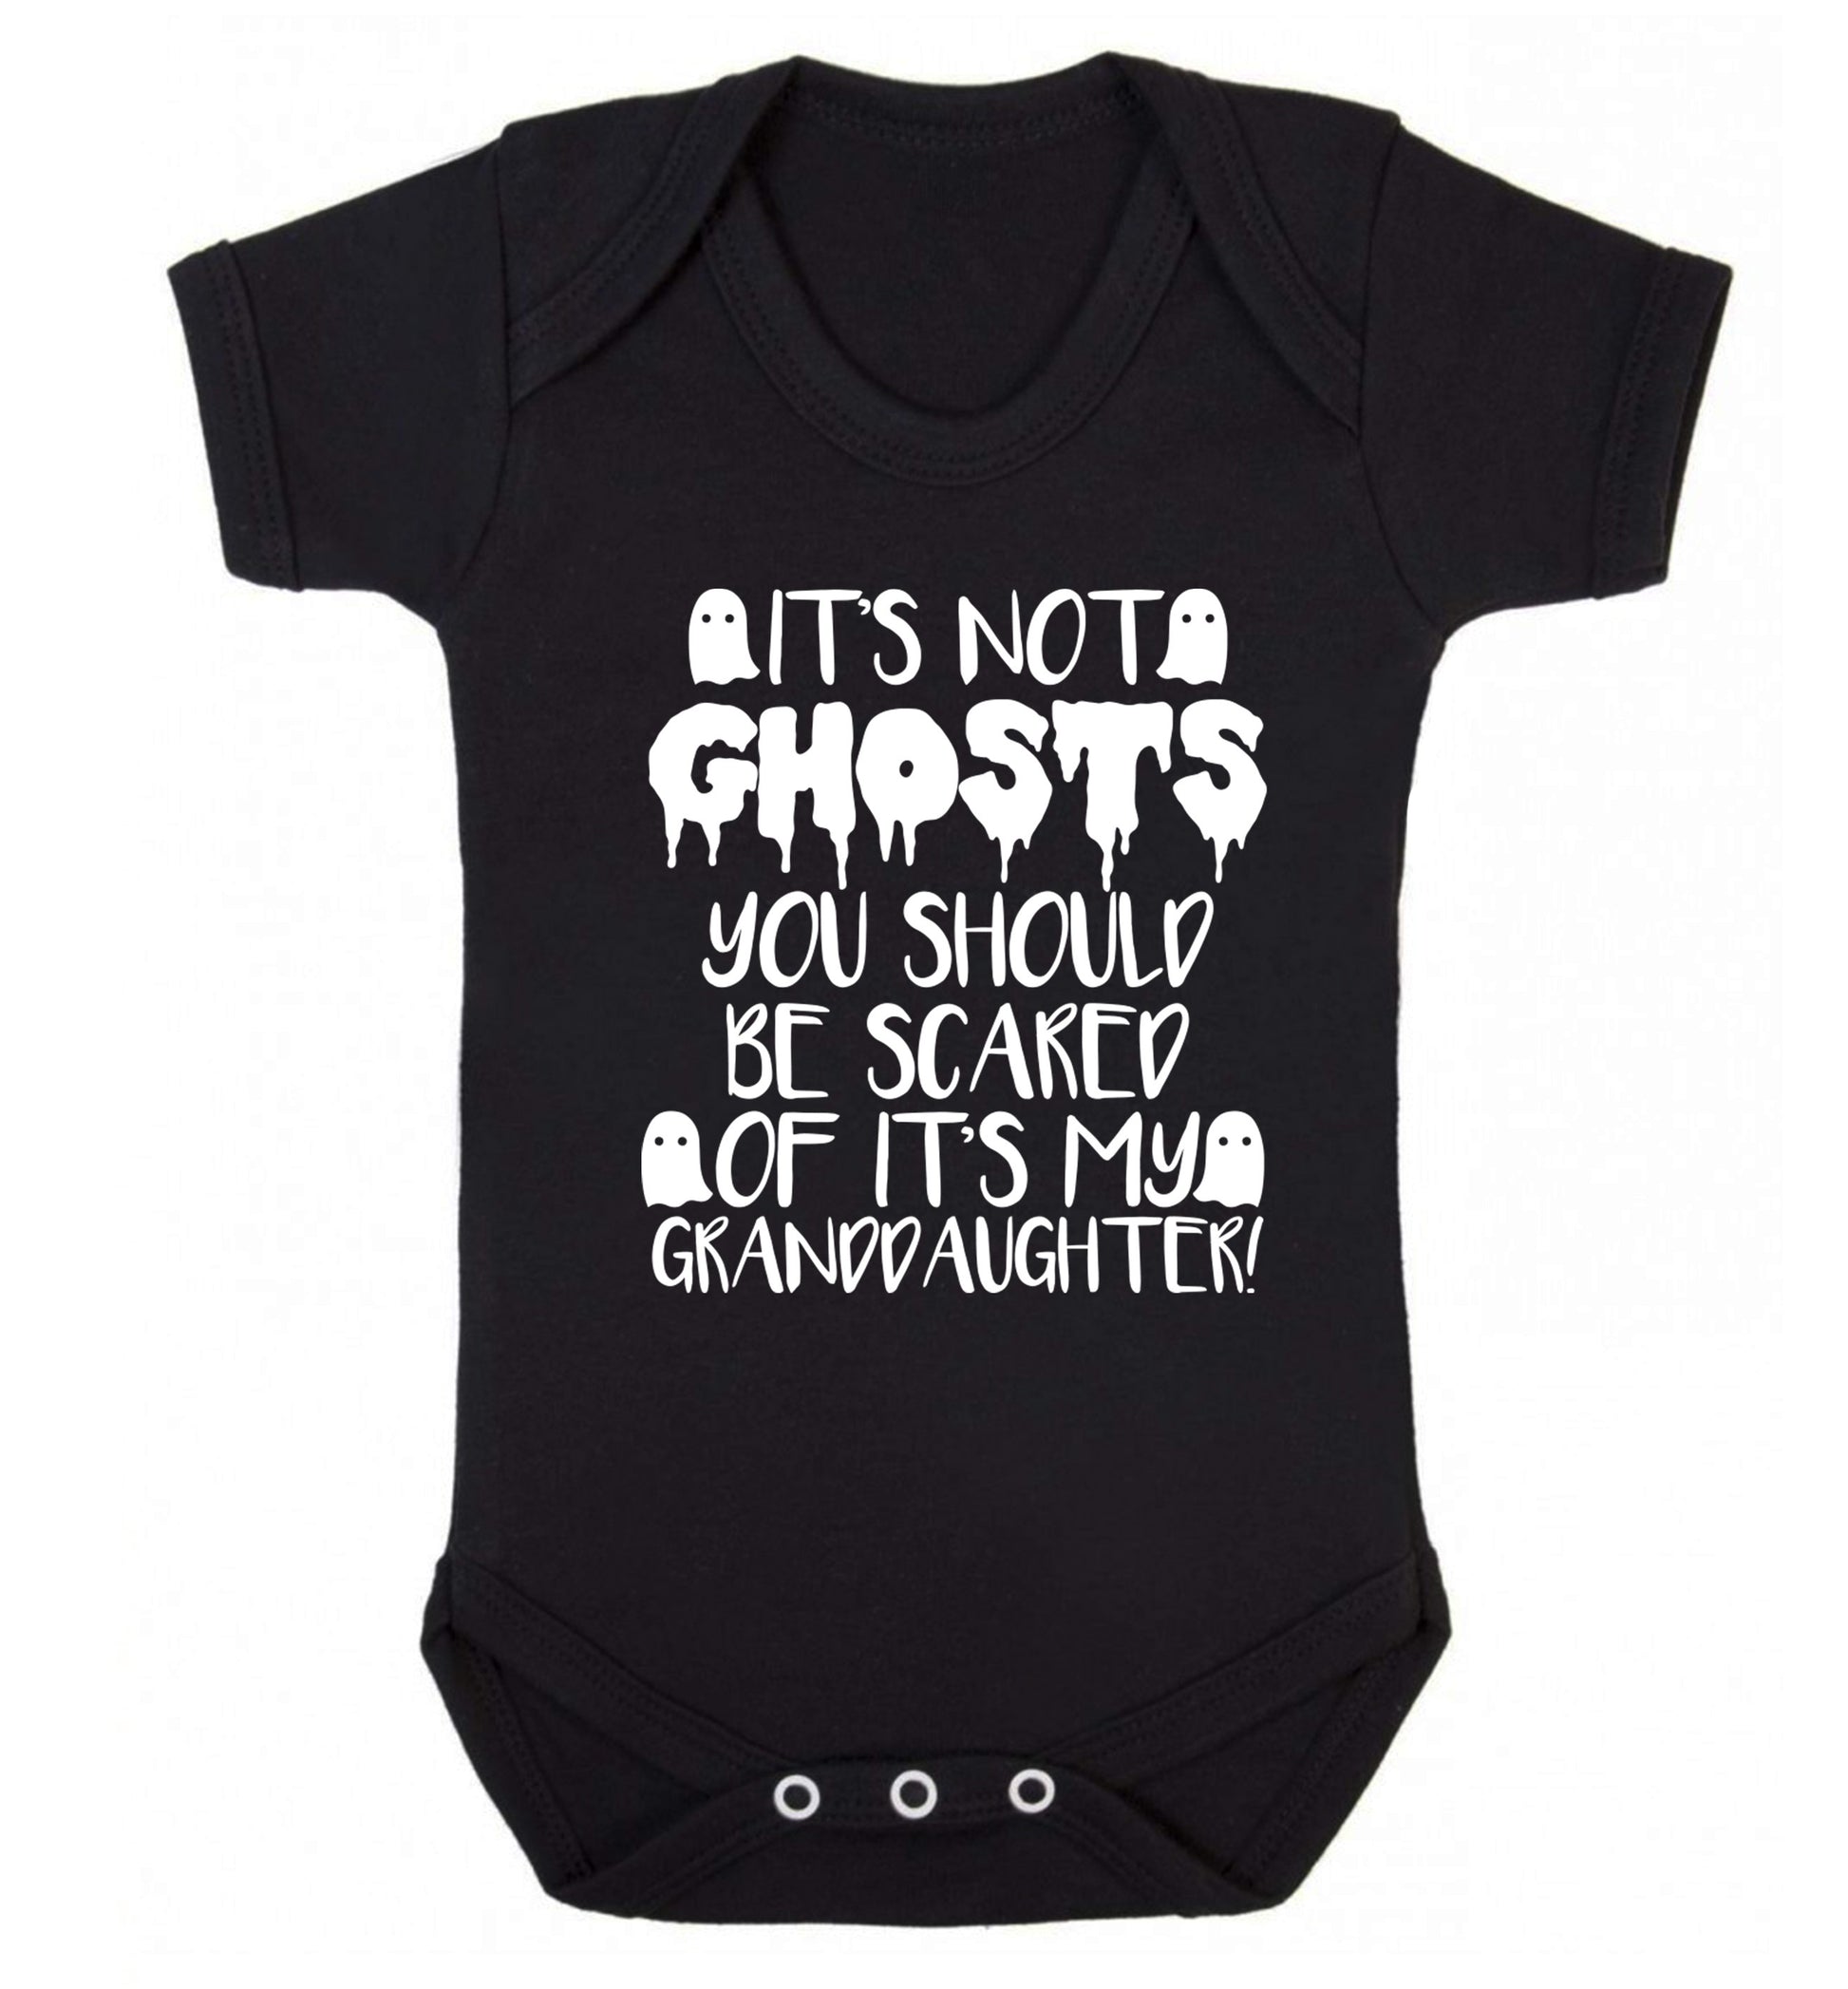 It's not ghosts you should be scared of it's my granddaughter! Baby Vest black 18-24 months